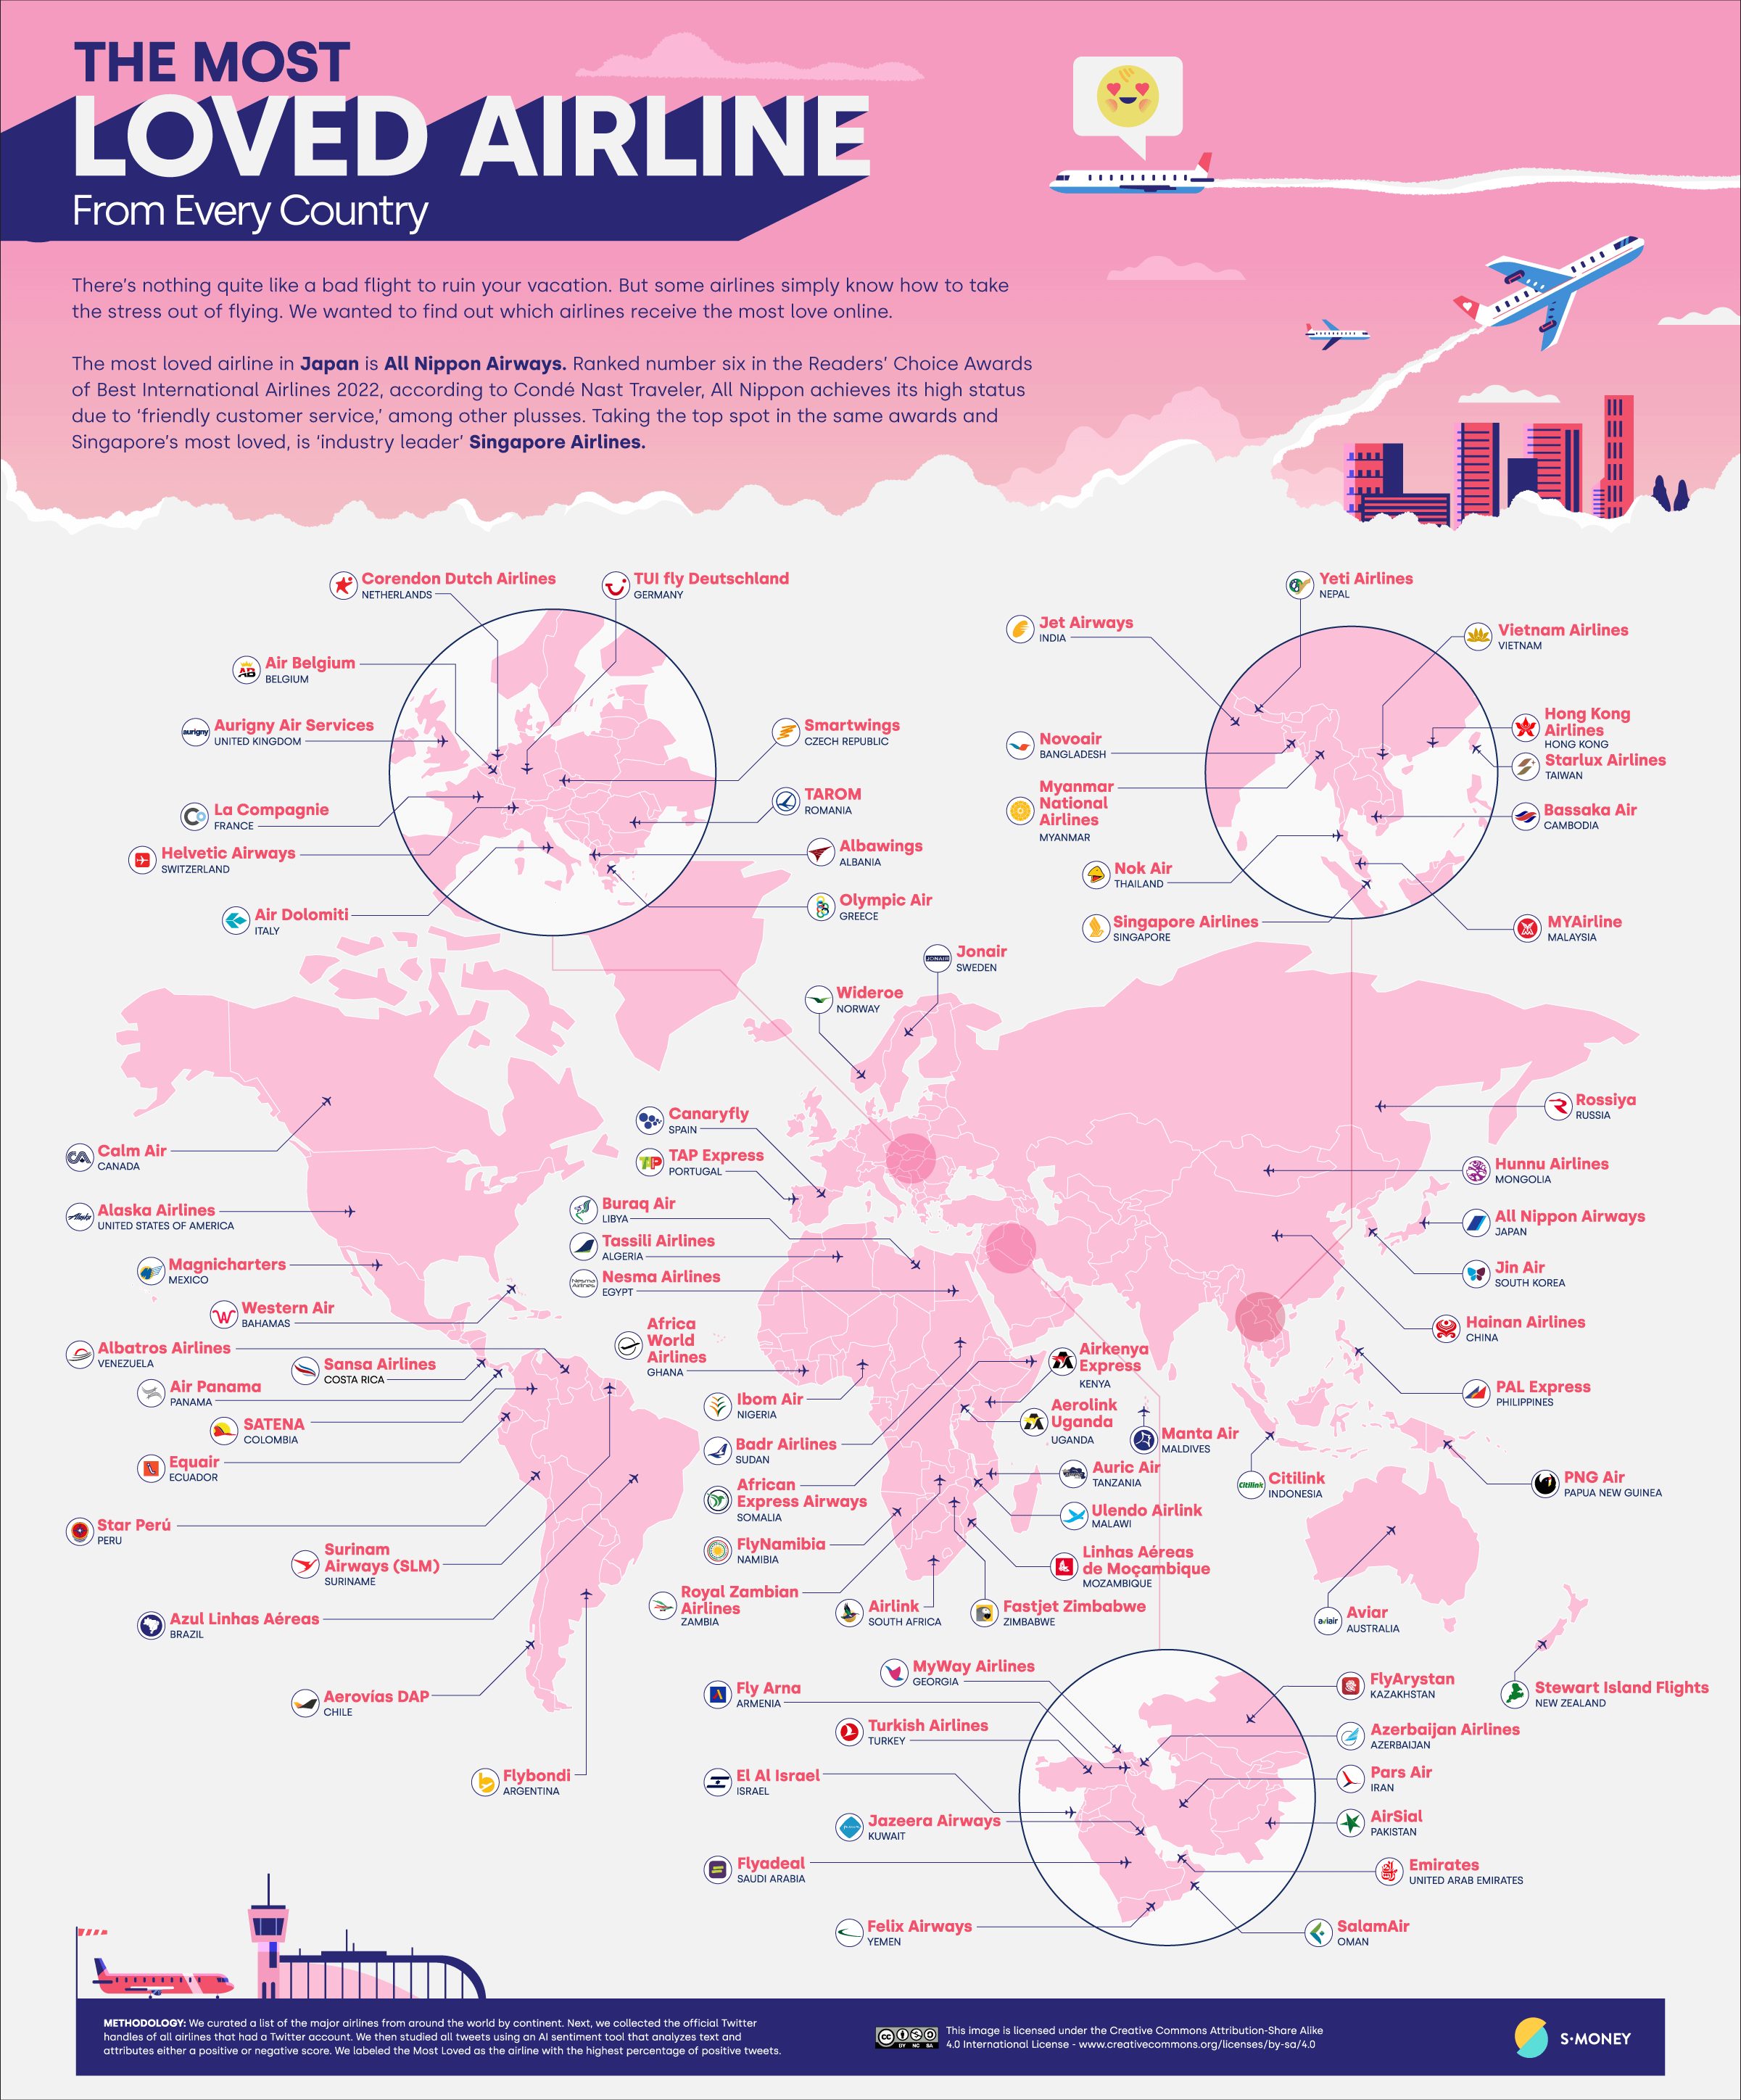 The Most loved airlines map